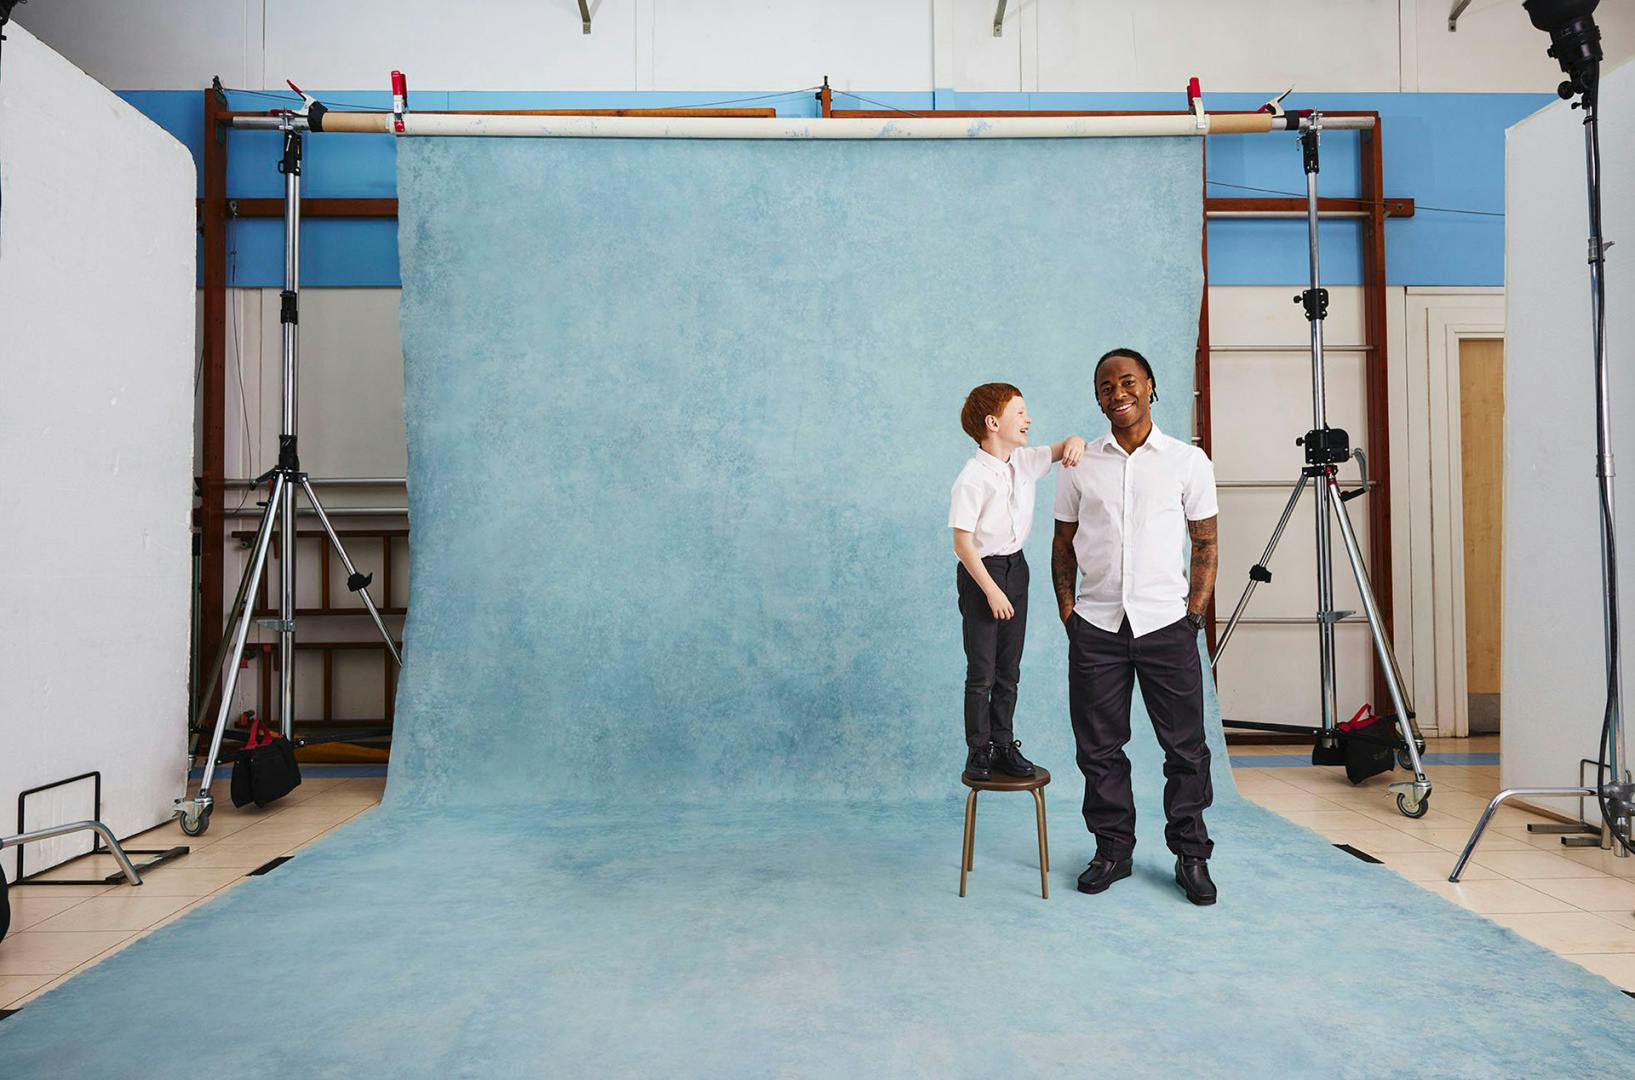 Photograph of Raheem Sterling wearing a white shirt and dark trousers with his hands in his pockets, with a school boy in uniform standing on a stool and leaning his arm on Sterling's shoulder. Both are standing on a blue studio backdrop